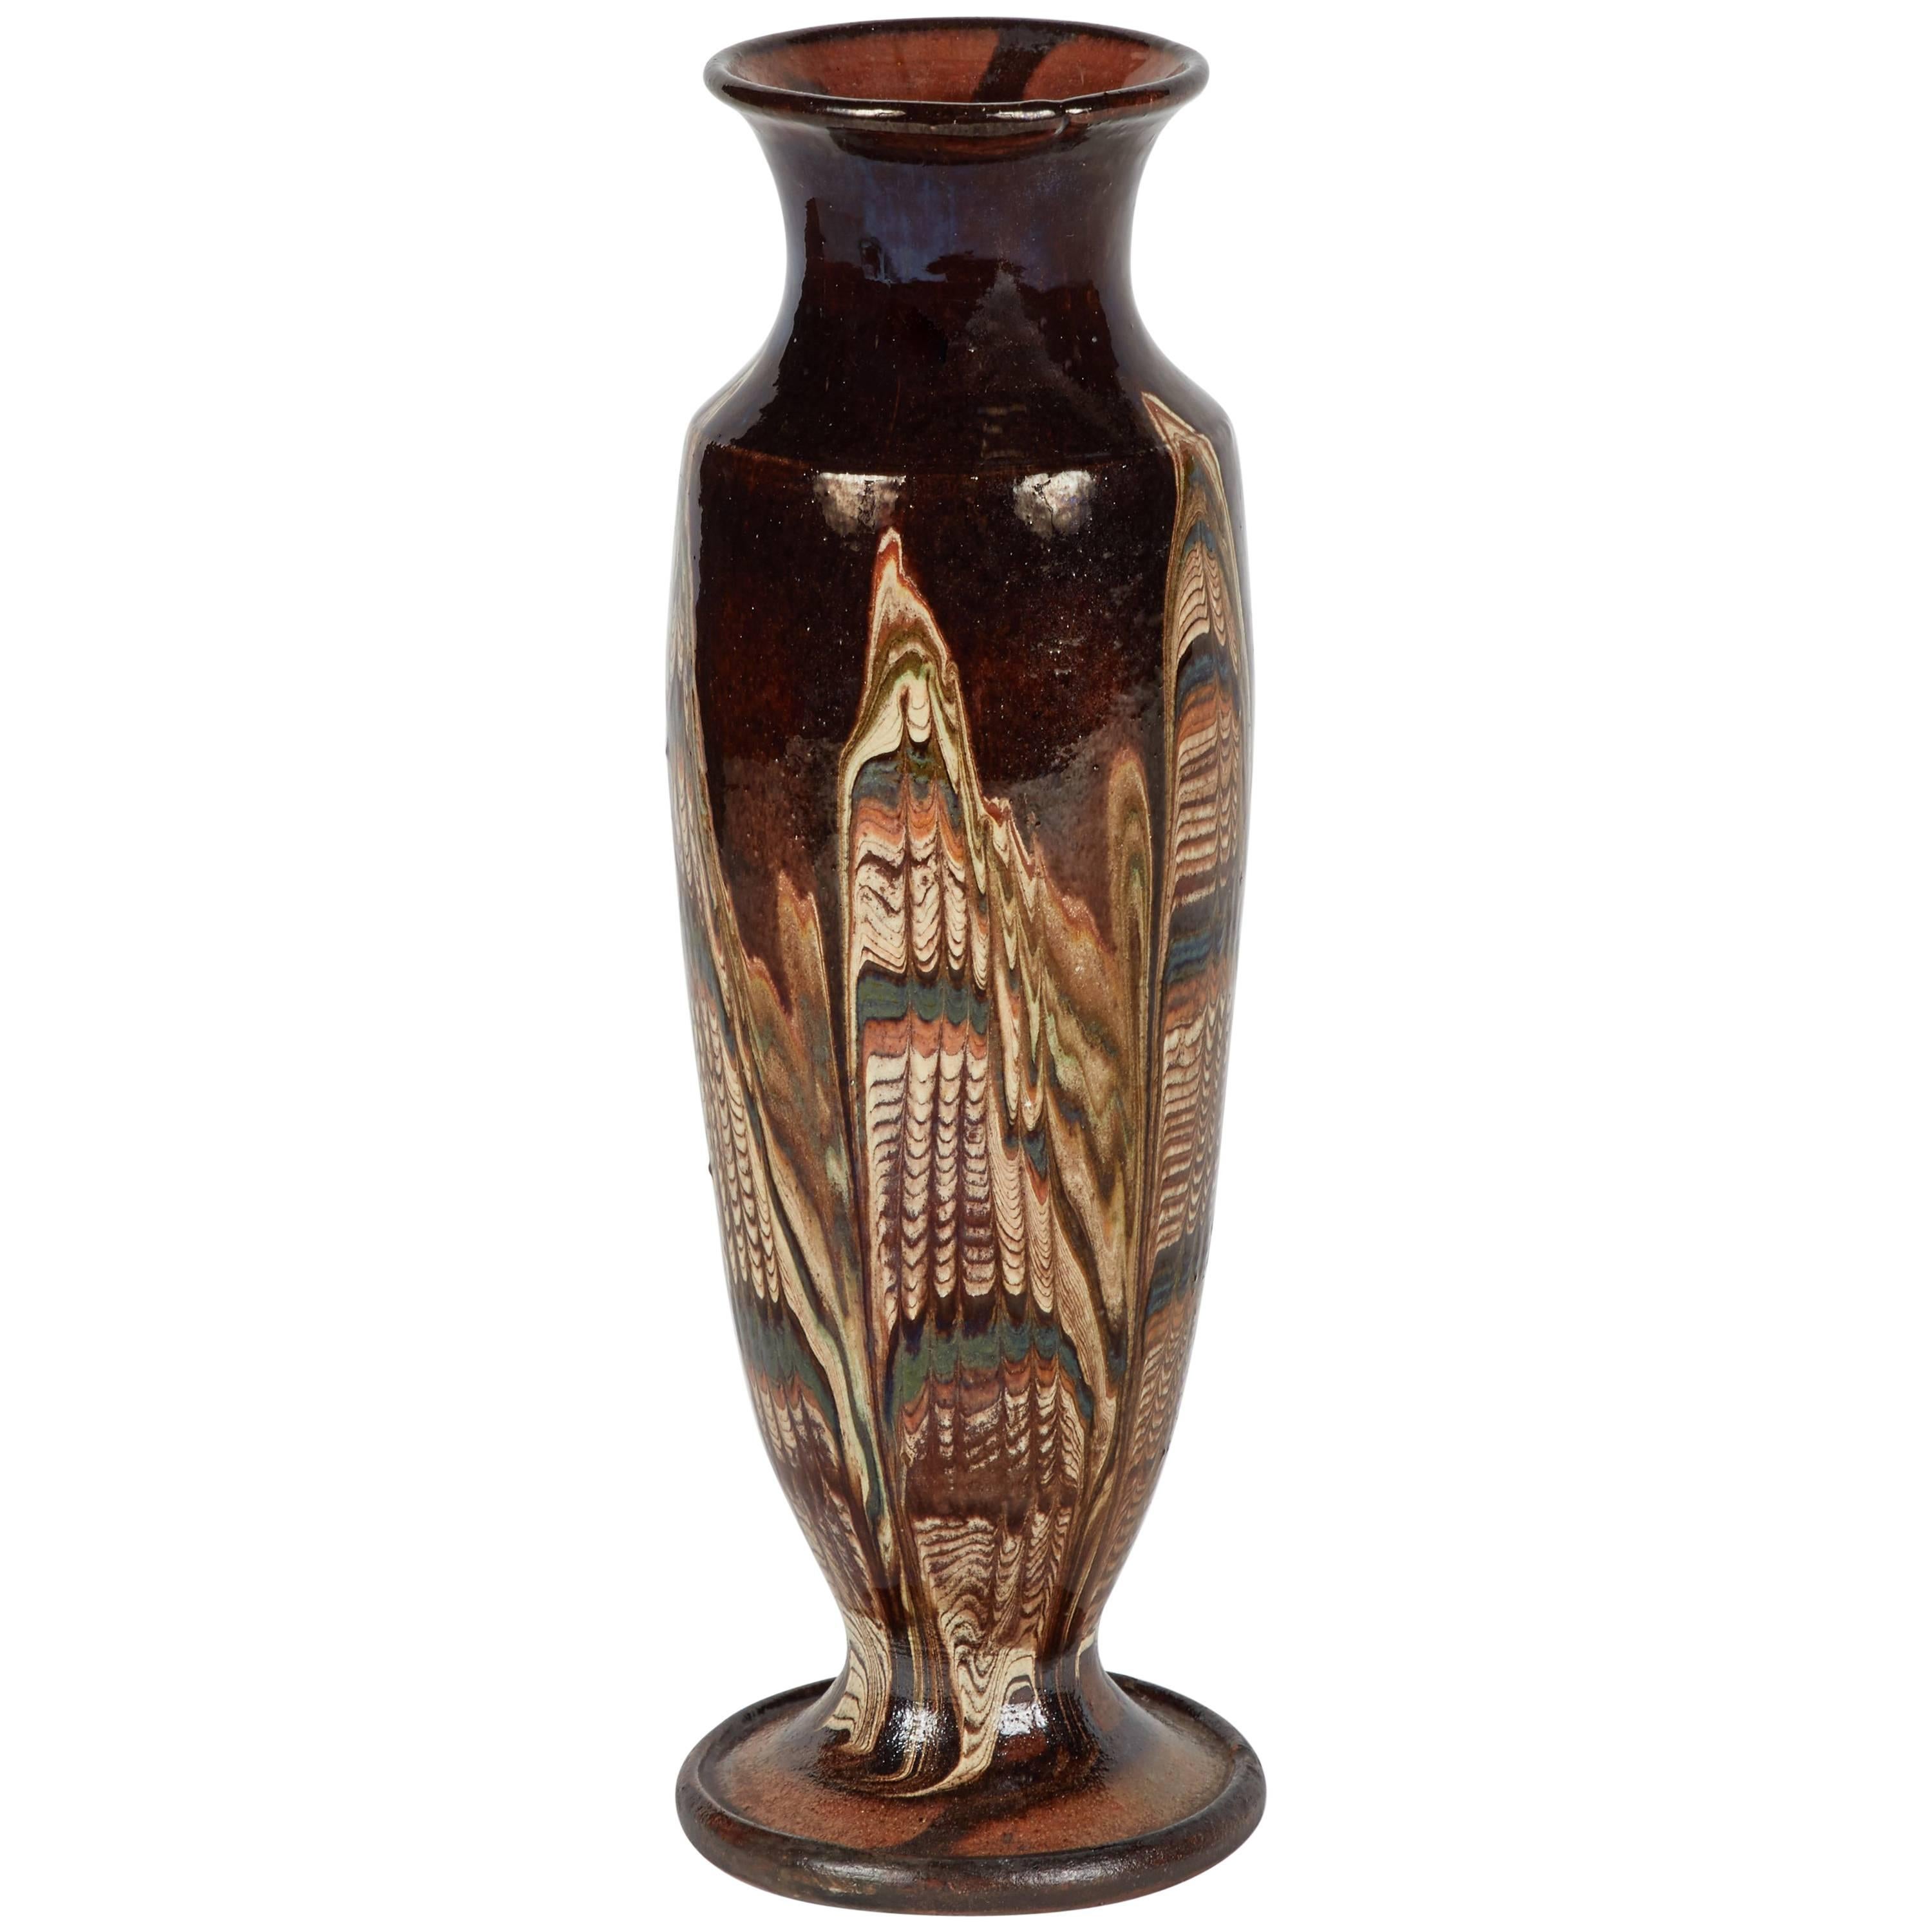 1920s Small Multi-Color Glazed Vase from France